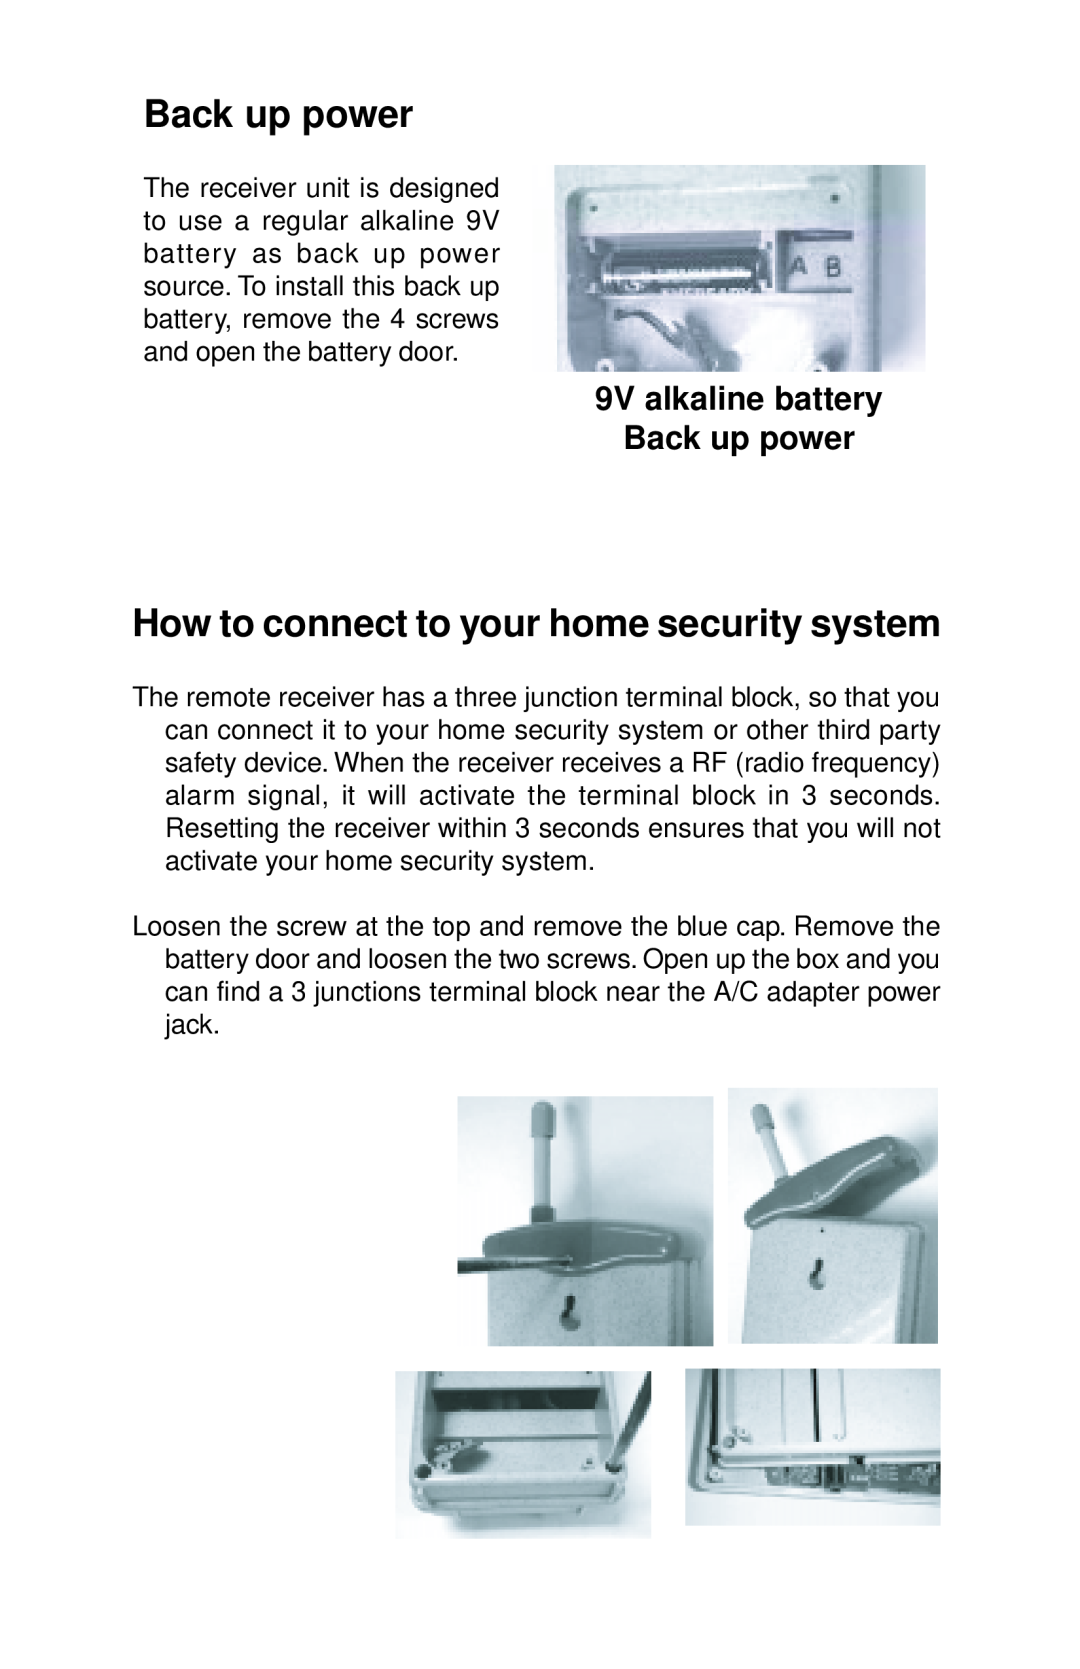 SmartPool Inc PE13 warranty How to connect to your home security system, 9V alkaline battery Back up power 